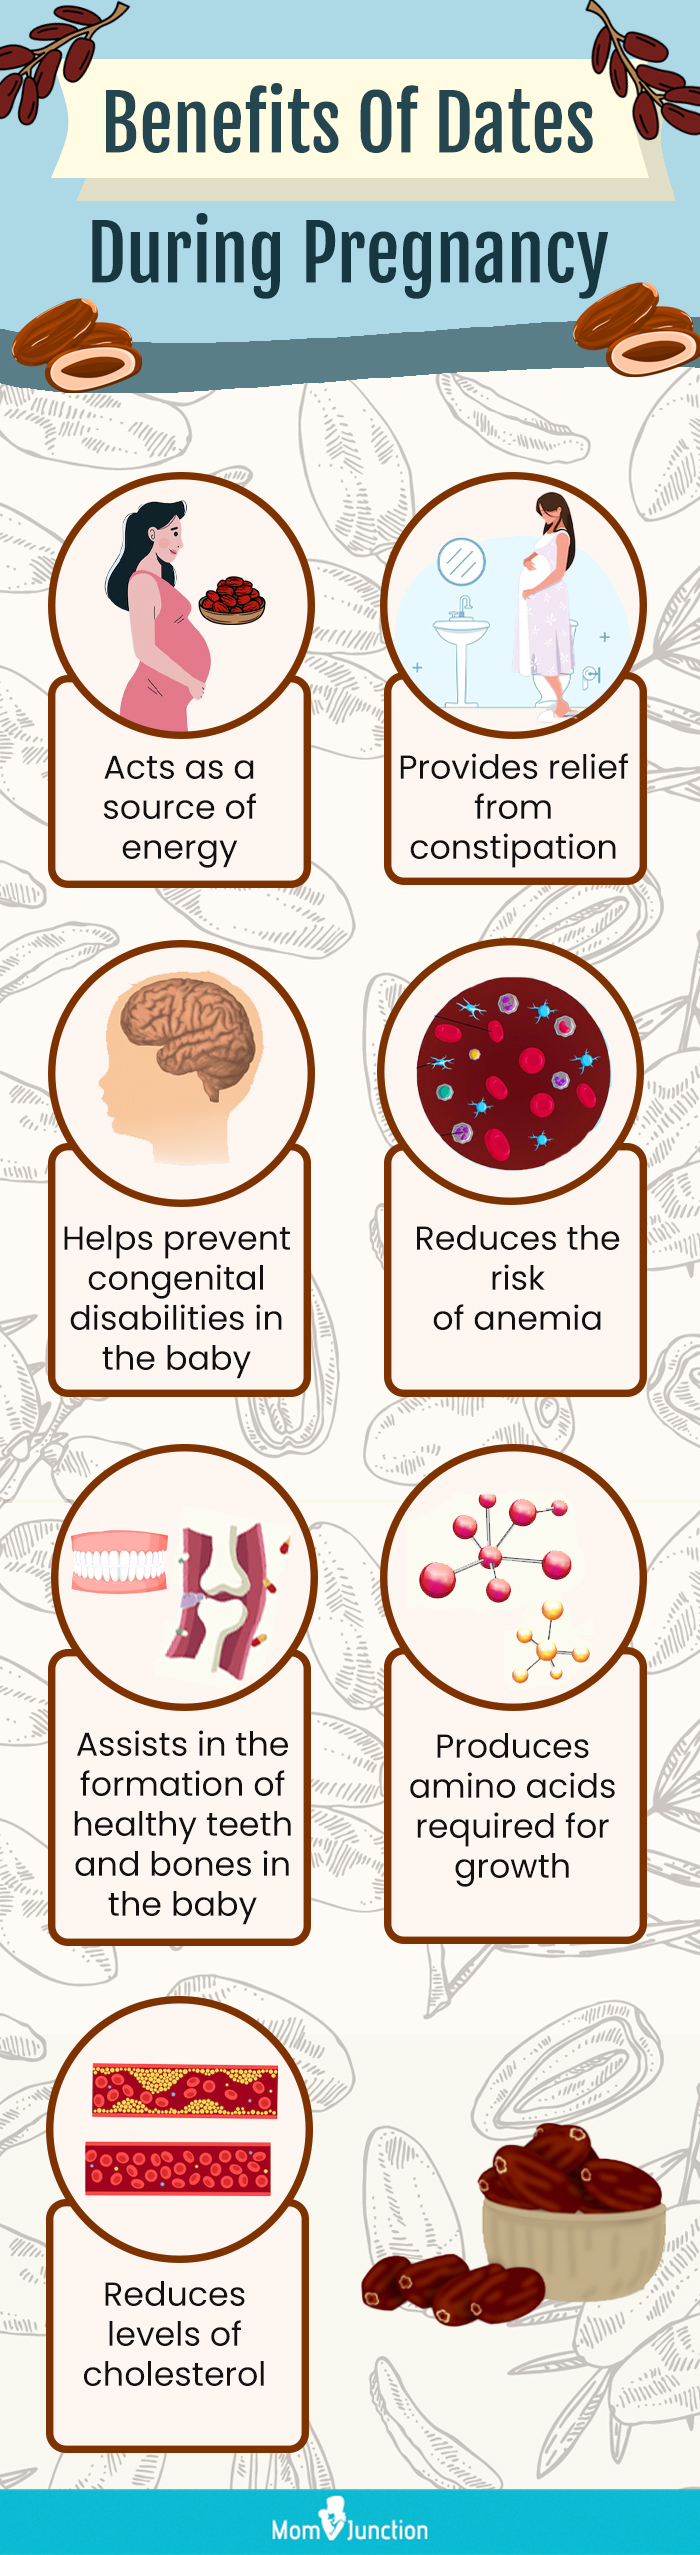 benefits of dates during pregnancy [infographic]